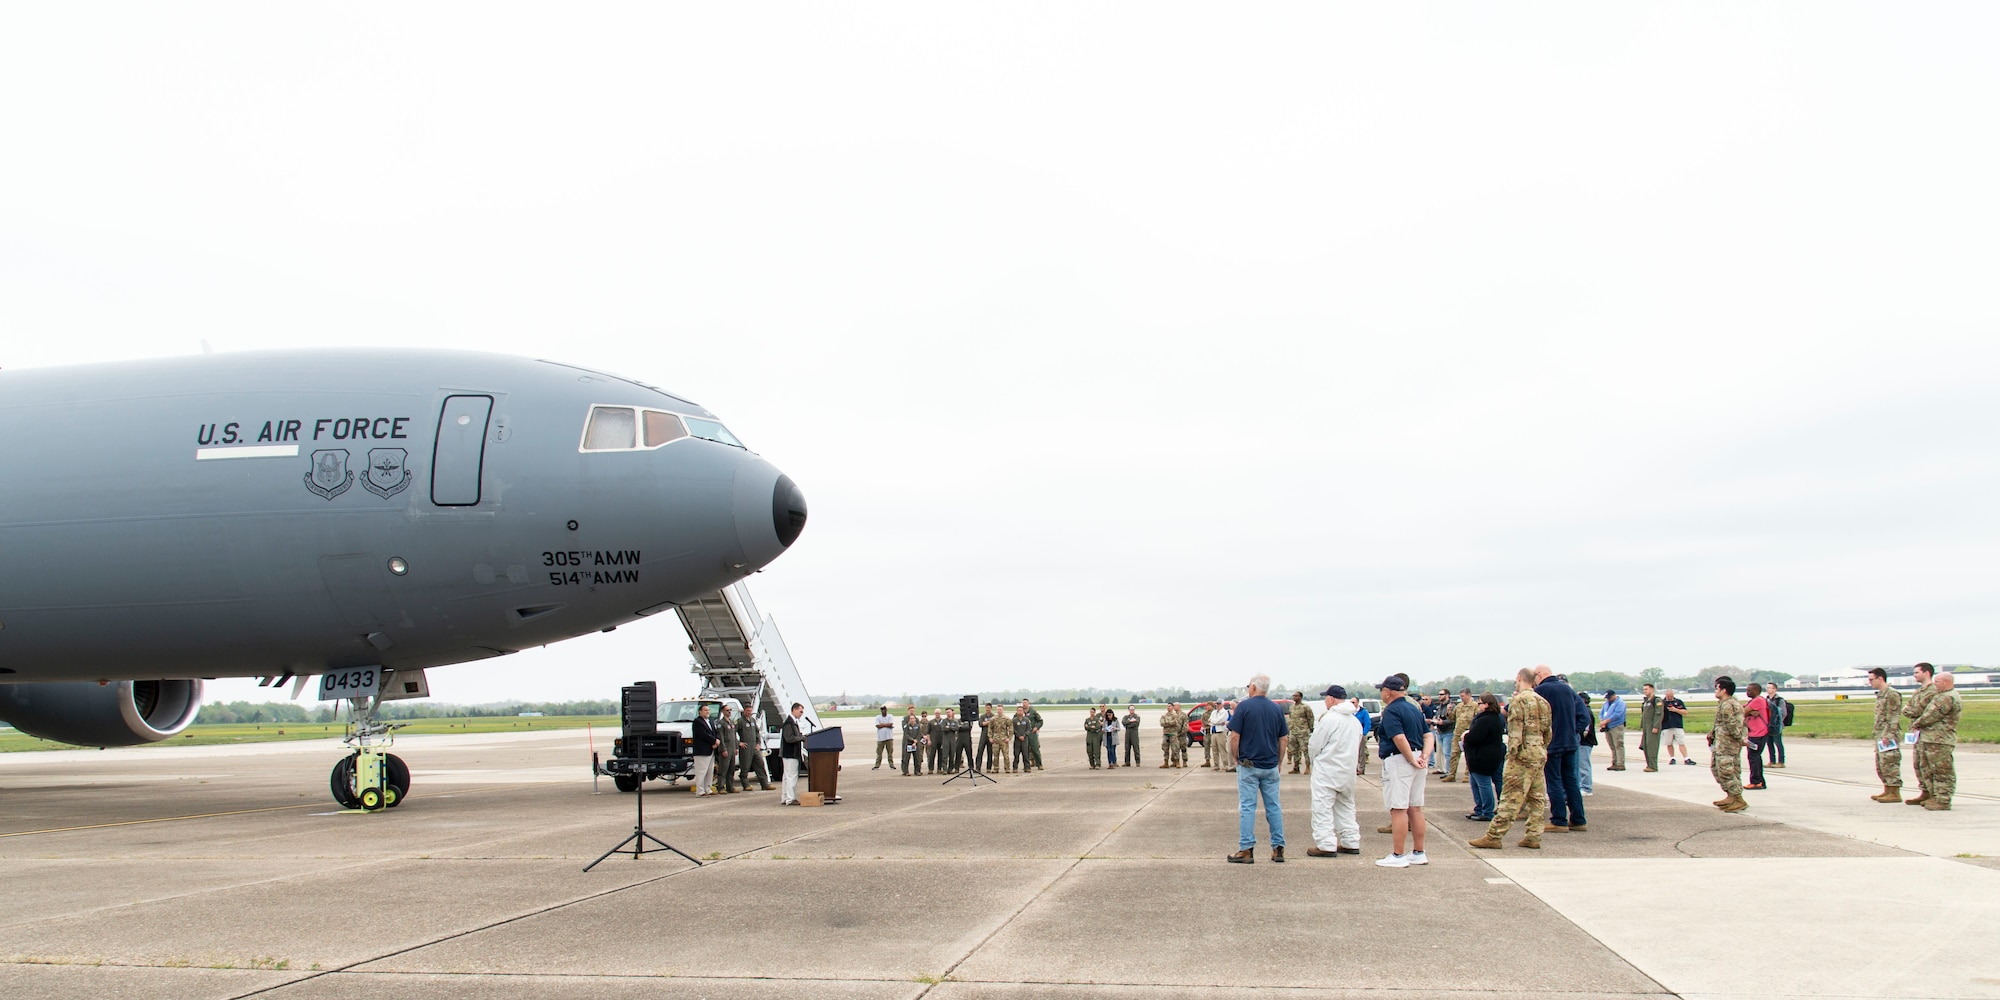 Attendees listen to guest speakers during a KC-10A Extender retirement ceremony at the Air Mobility Command Museum on Dover Air Force Base, Delaware, April 26, 2022. This particular aircraft was the first of 60 Extenders that entered the U.S. Air Force inventory. The aircraft was retired to Dover AFB from Joint Base McGuire-Dix-Lakehurst, New Jersey, to become the 36th addition to the AMC Museum. (U.S. Air Force photo by Roland Balik)